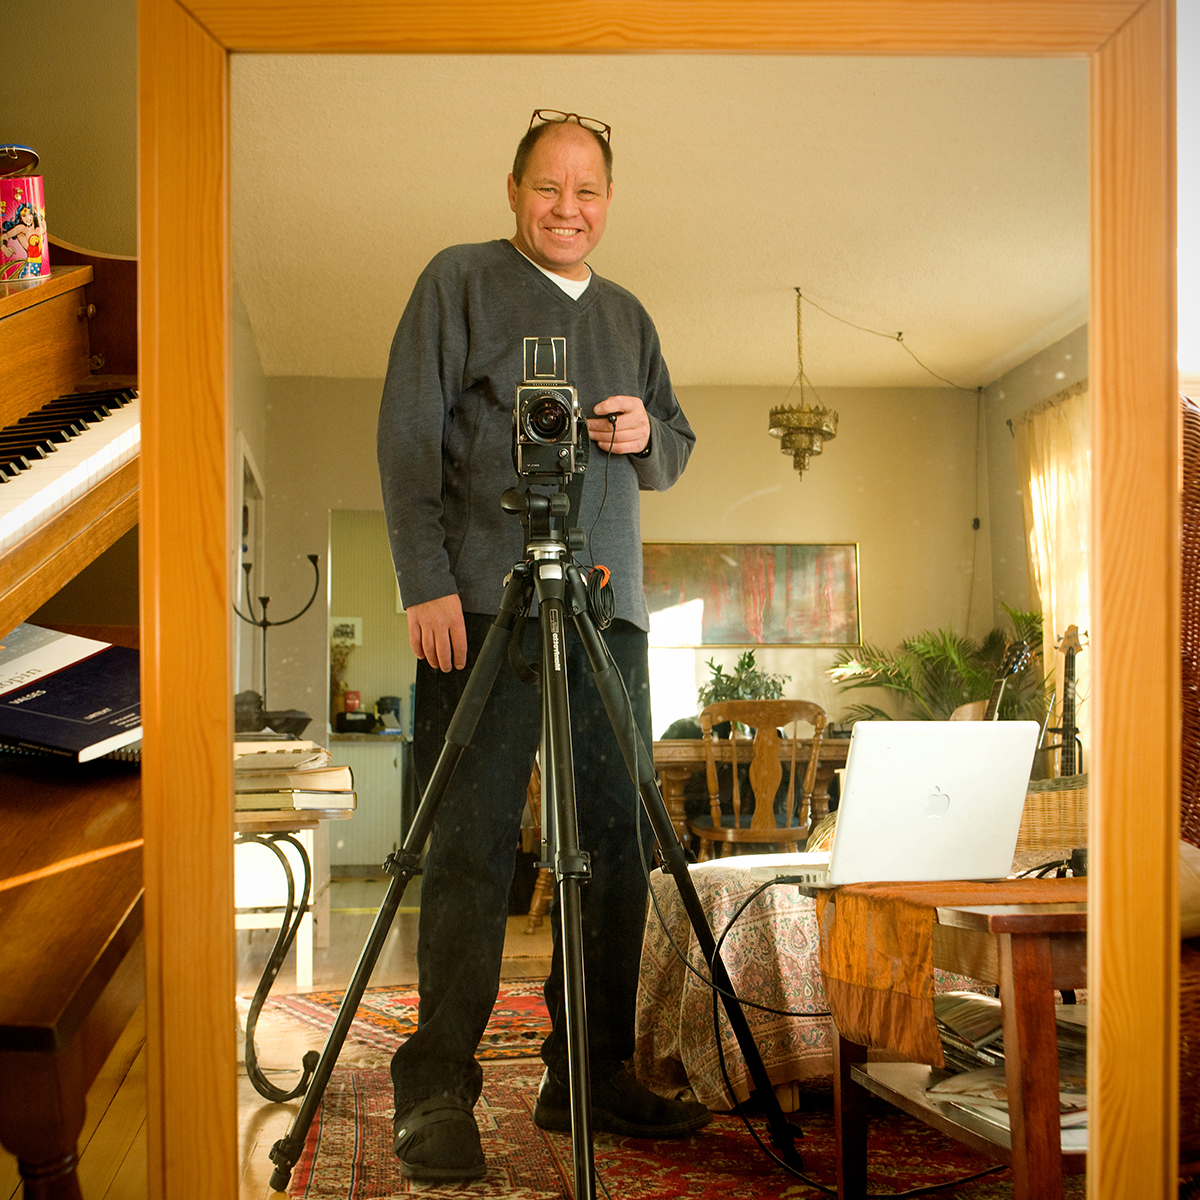 Richard photographing himself in a mirror in 2007.